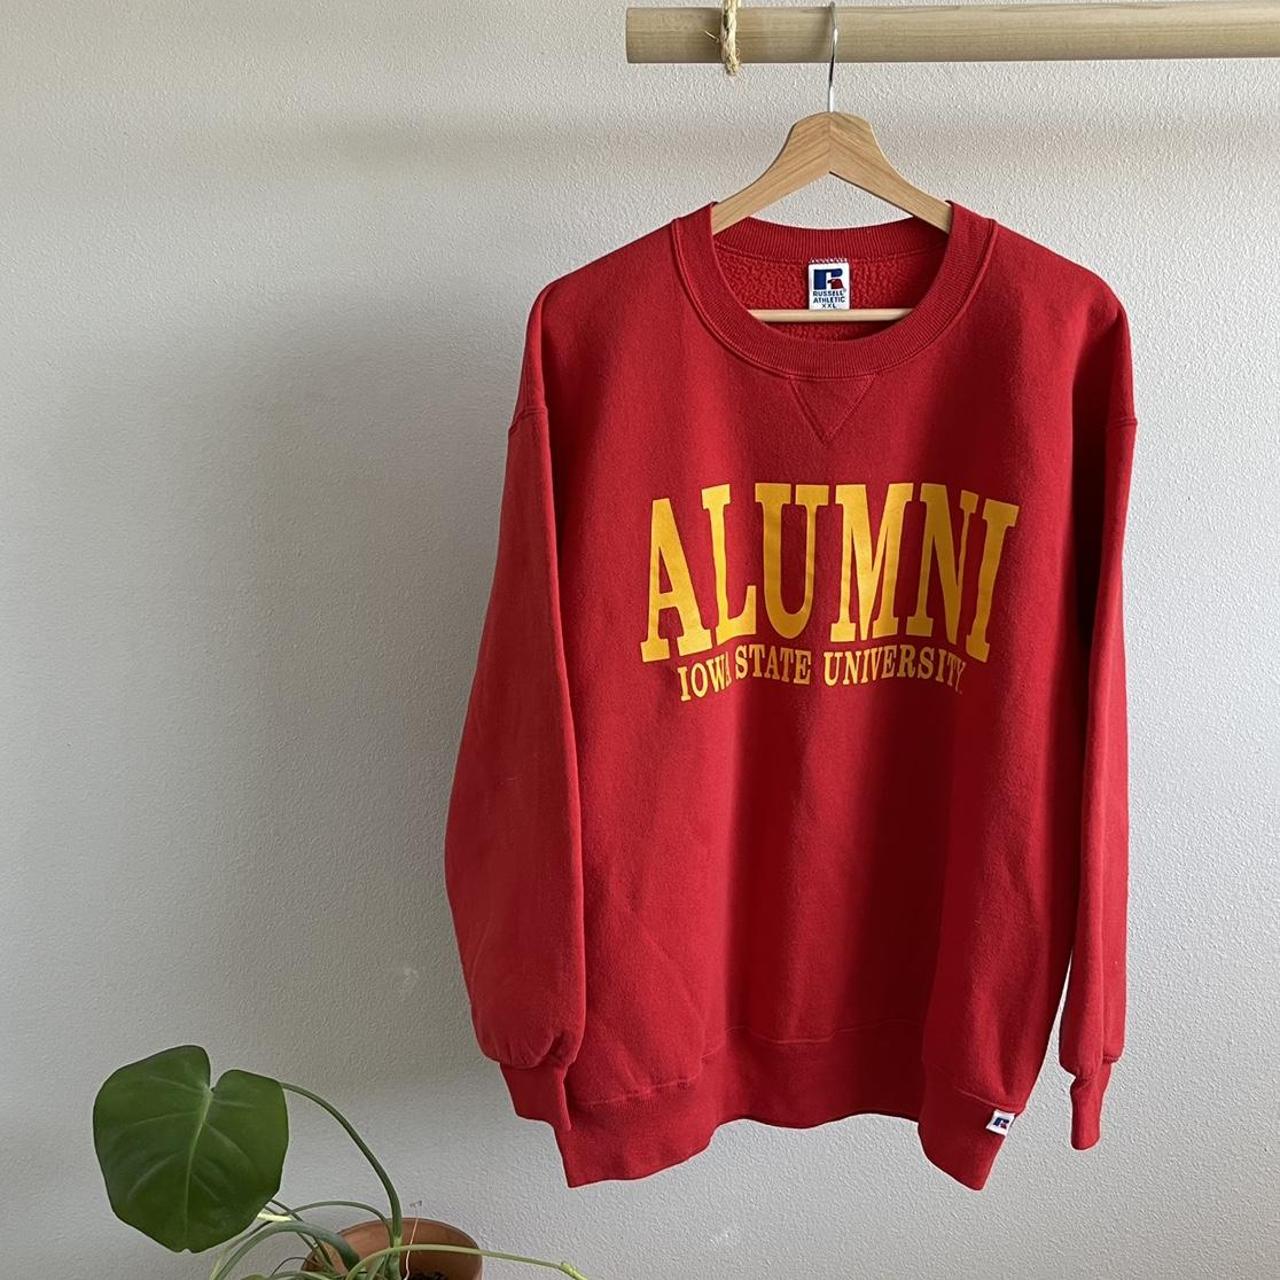 Russell Athletic Men's Red and Yellow Sweatshirt